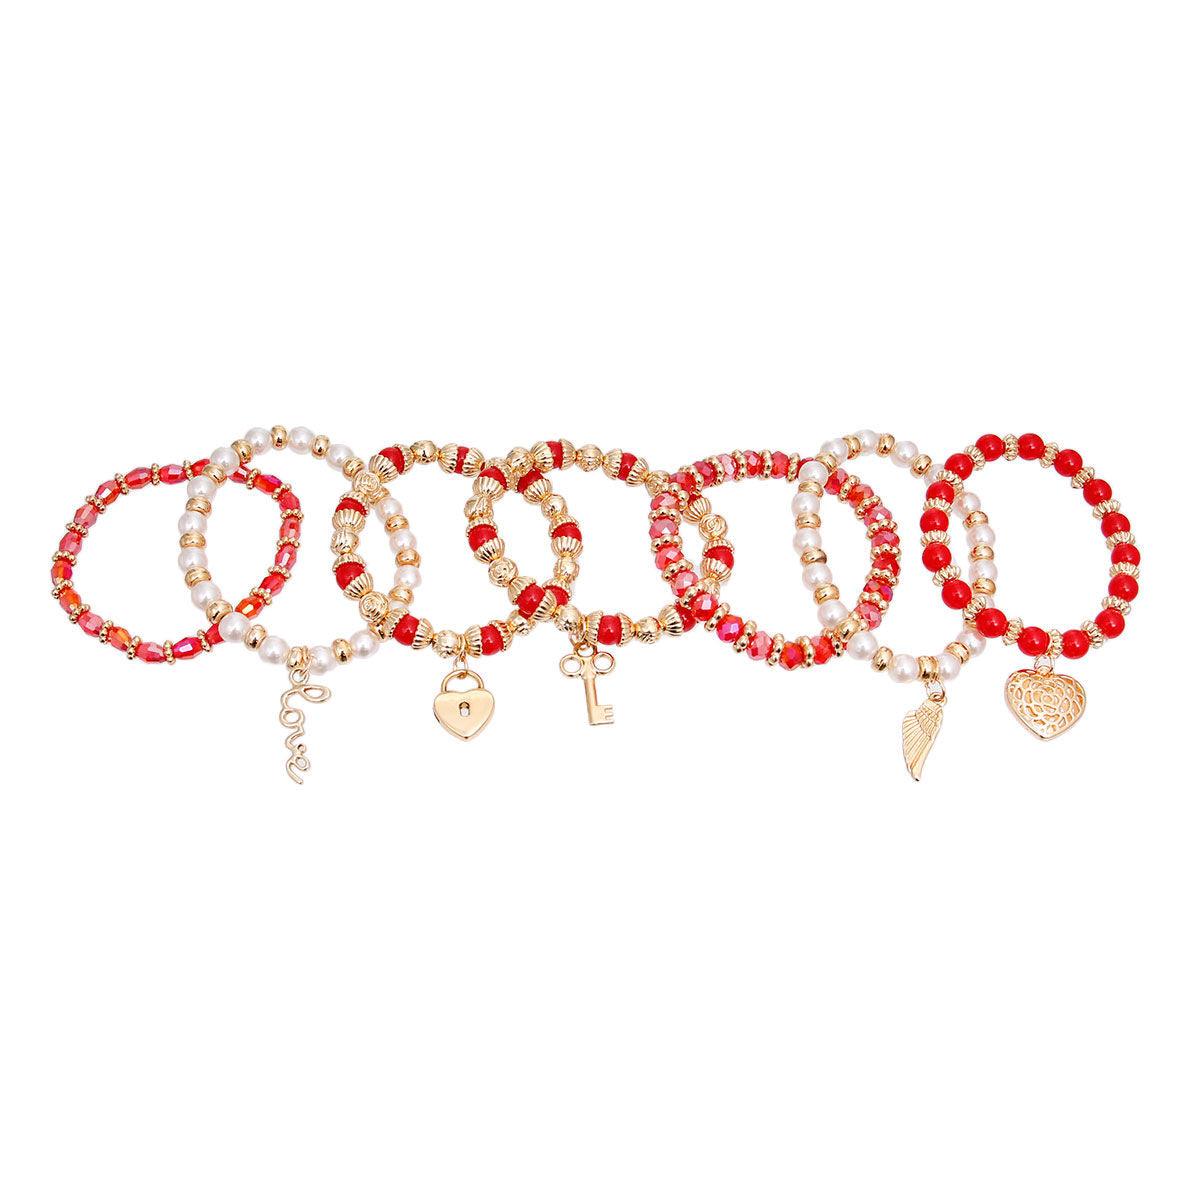 Make a Statement with Red & Faux Pearl Love Charm Bracelets: Shop the Latest Trends Now